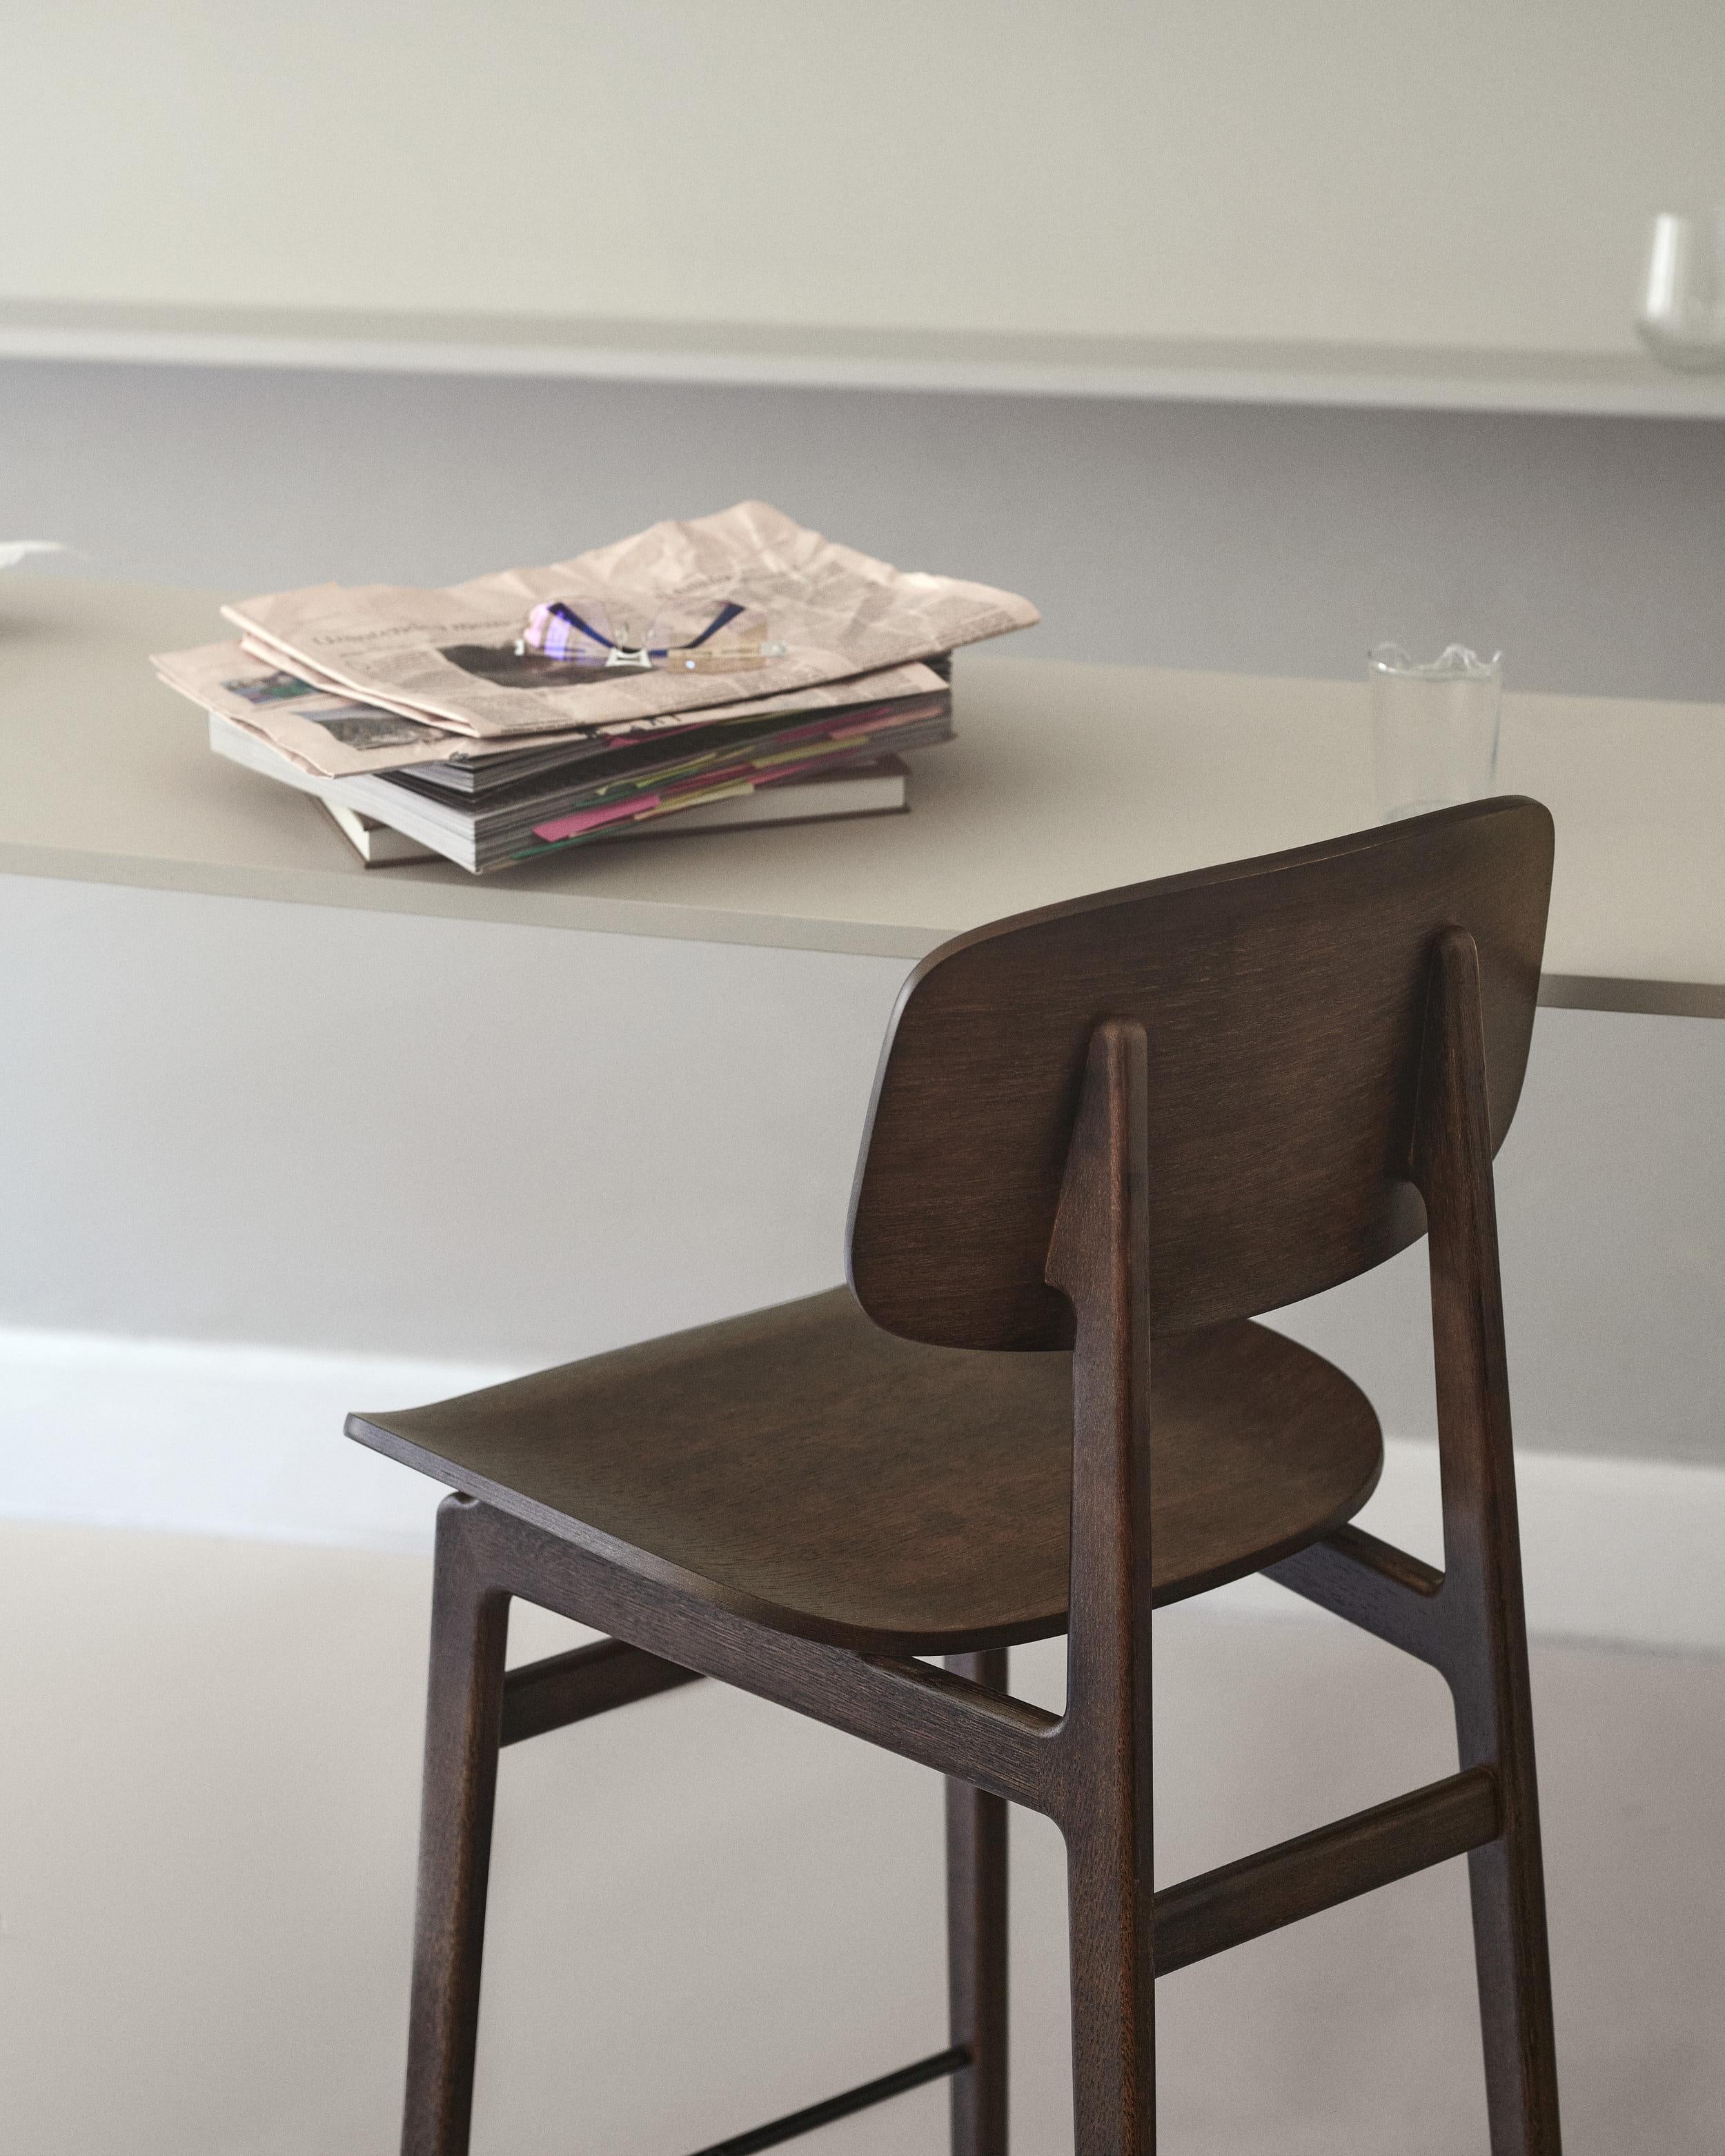 NY11 Bar Chair 65 by NORR11
Dimensions: D 45,5 x W 52 x H 98 cm. SH: 65 cm.
Materials: Black oak, steel and upholstery.
Upholstery: Dunes Camel 21004. 

Available in different oak finishes: Natural oak, light smoked oak, dark smoked oak, black oak.